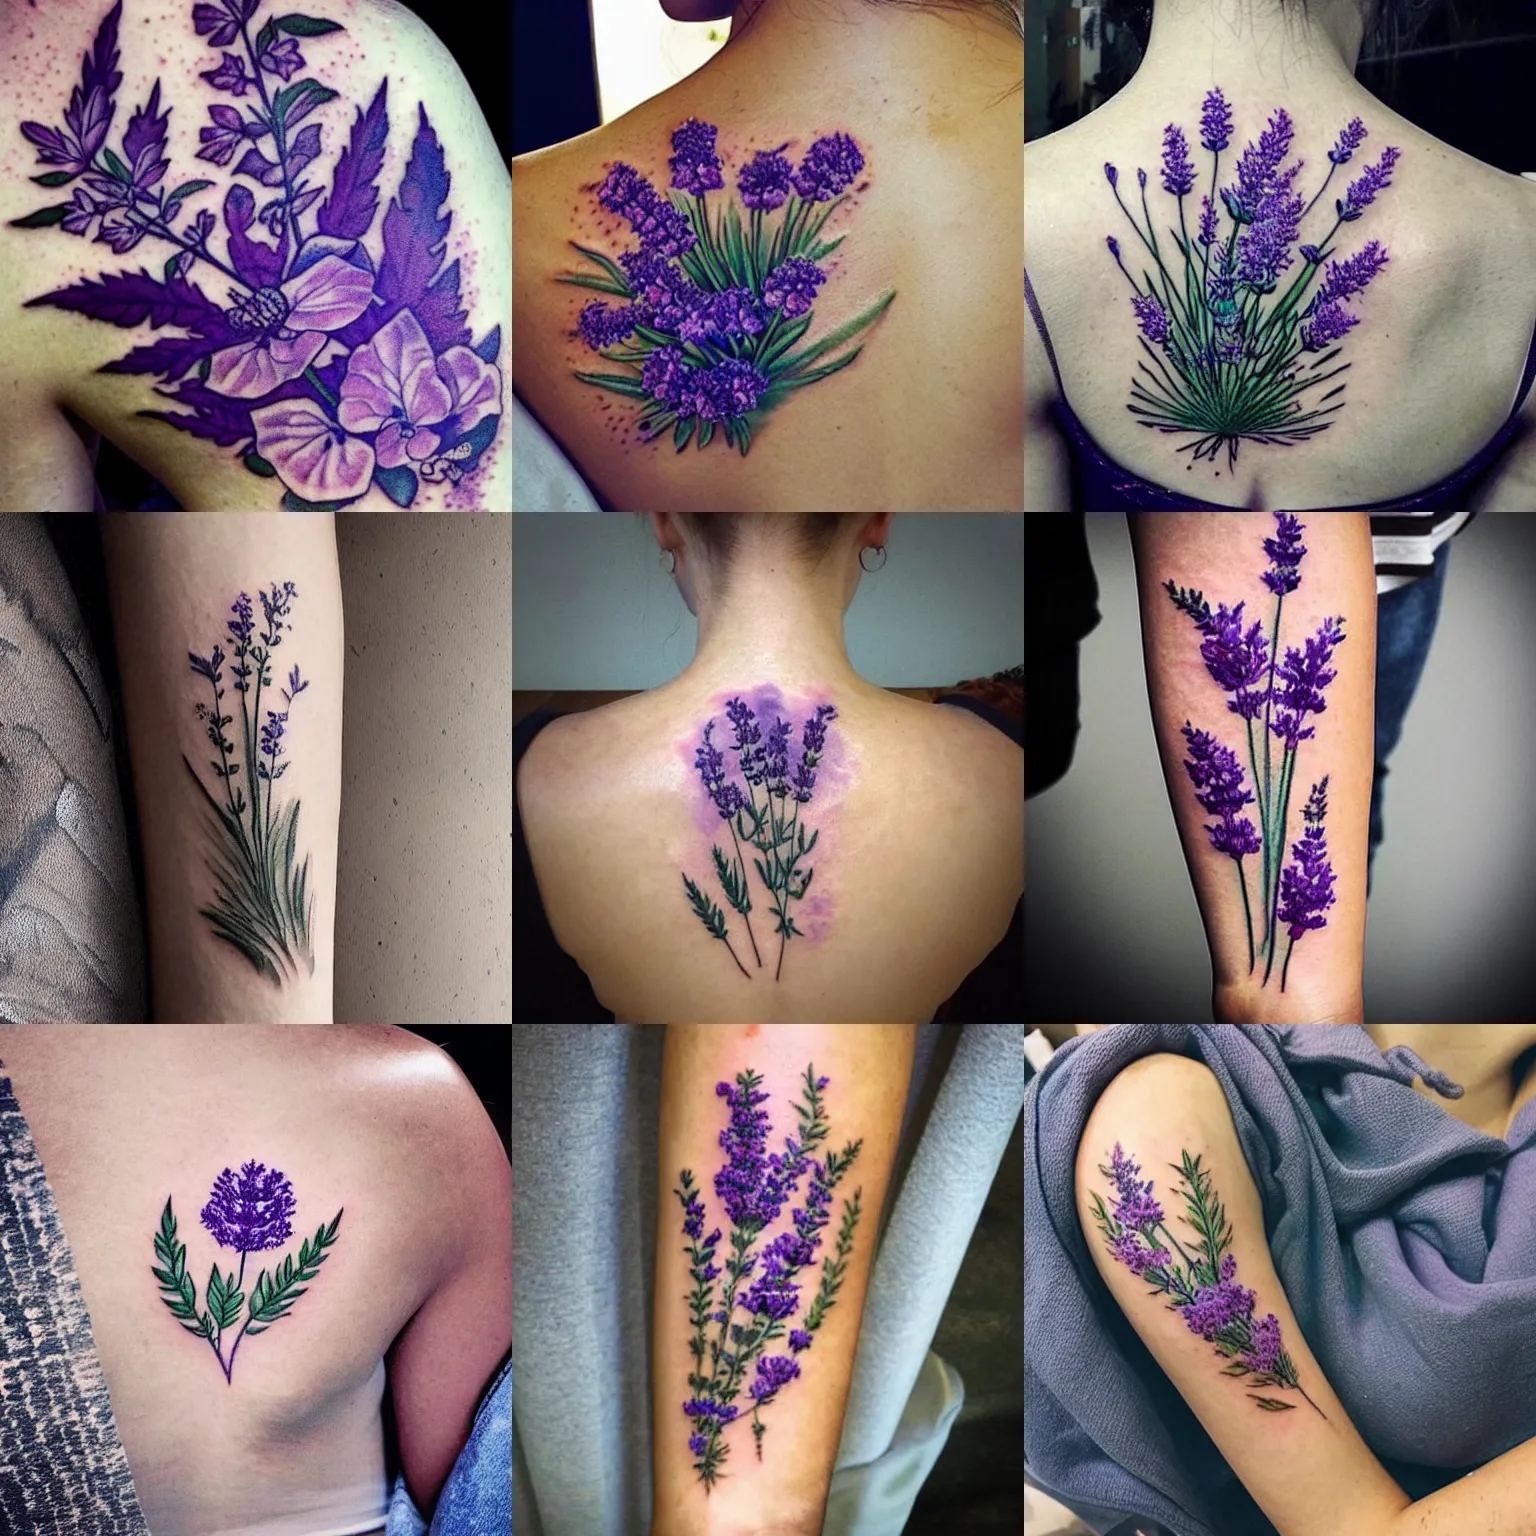 Lavender tattoo inked at @mac_tattoos_original #hauzkhas For appointments  do call or what's app us on : +91 8851 012 863 +91 7042 130… | Instagram